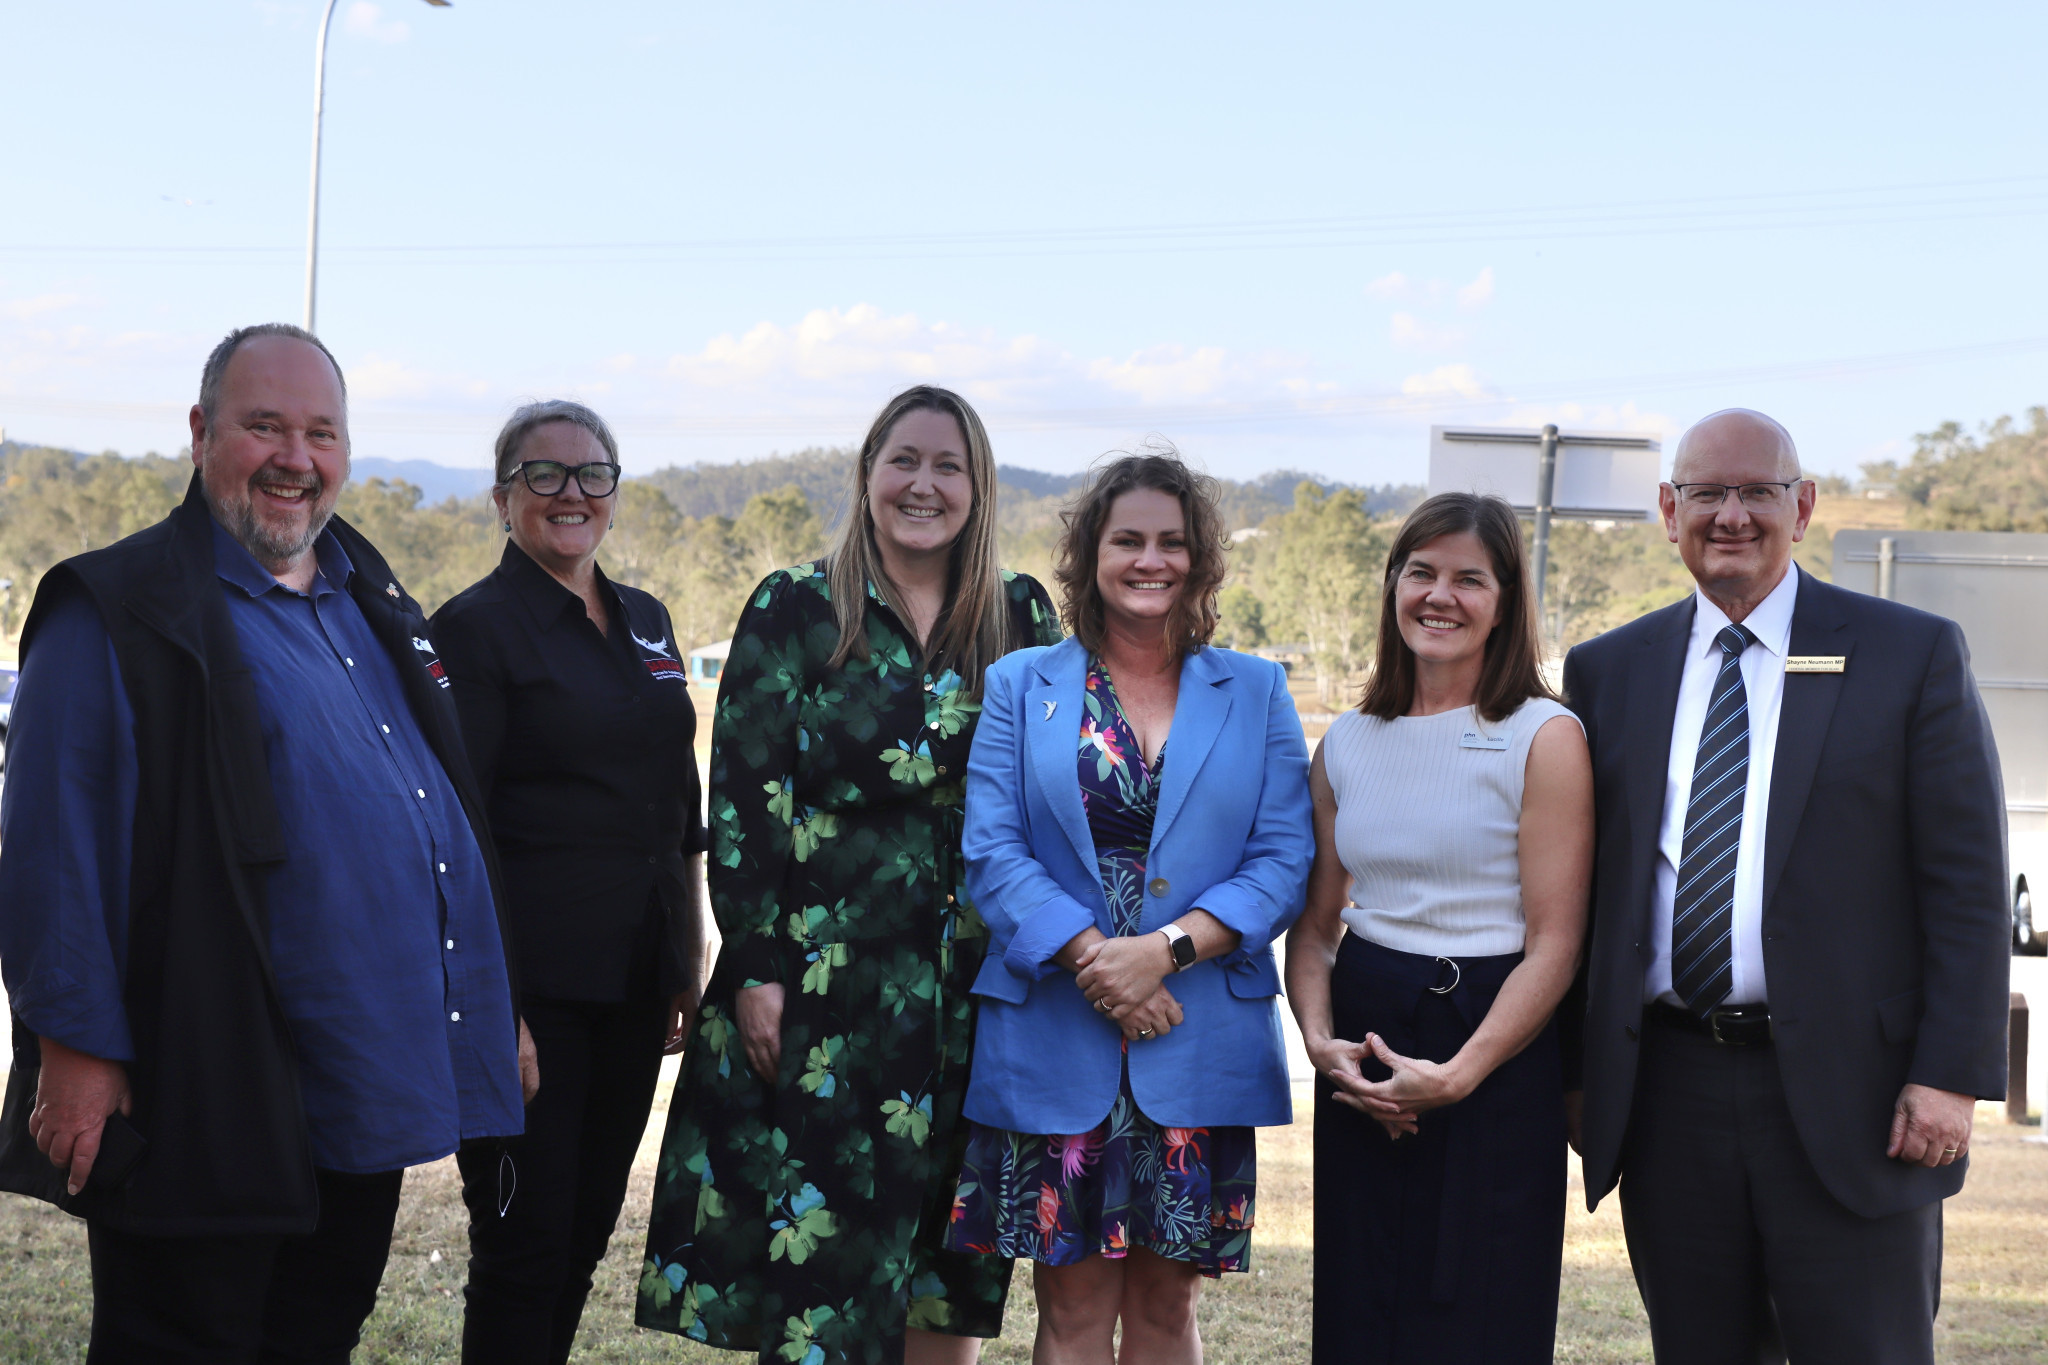 Federal Member for Blair Shayne Neumann hosted a regional health forum in Fernvale in August with Assistant Minister for Rural and Regional Health Emma McBride (third from left) and health stakeholders. He is calling on local health professionals to have their say as part of a new health workforce review.